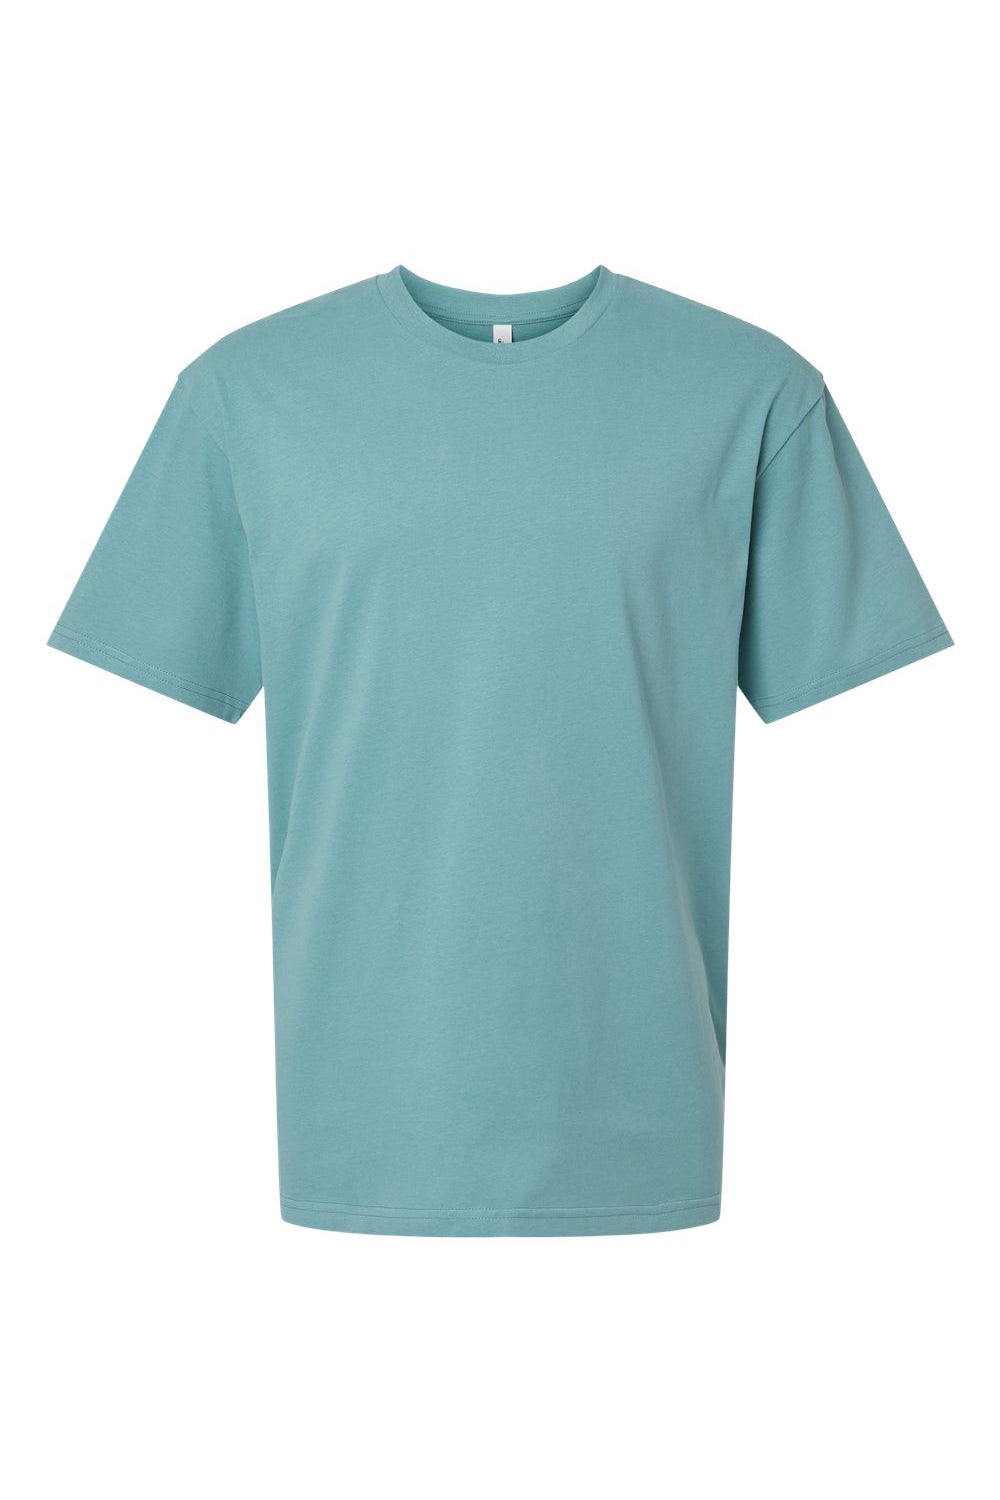 American Apparel 5389 Mens Sueded Cloud Short Sleeve Crewneck T-Shirt Sueded Arctic Flat Front